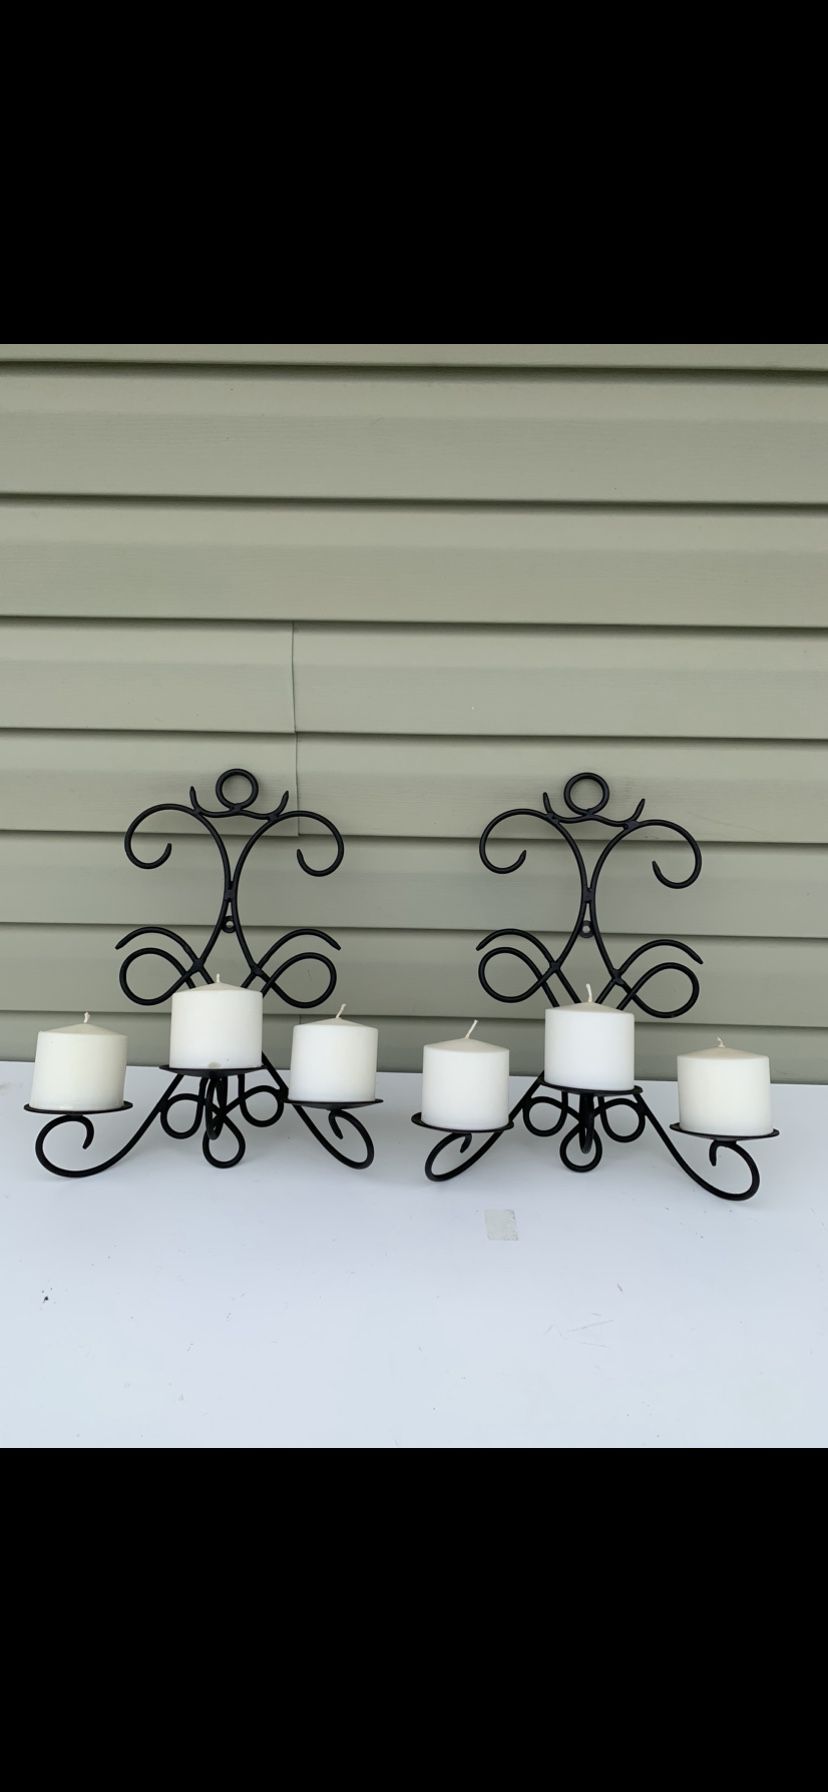 Wrought Iron Wall Sconces (2) Home Decorations Candle Holder From Home Goods